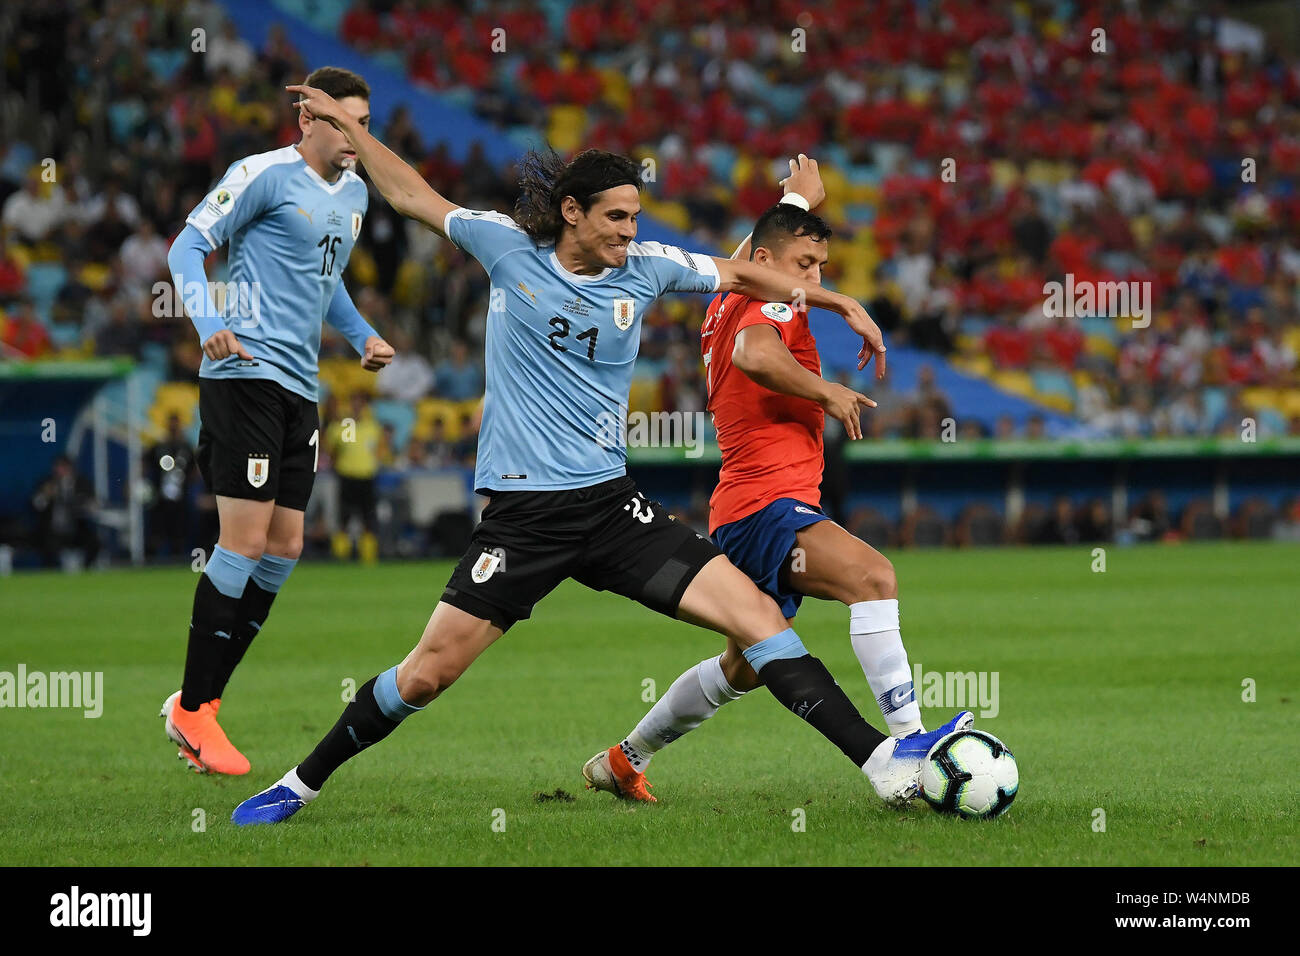 Uruguayan soccer player Cavani, during the Chile vs Uruguay game for the Copa América 2019 at the Maracanã stadium. Stock Photo